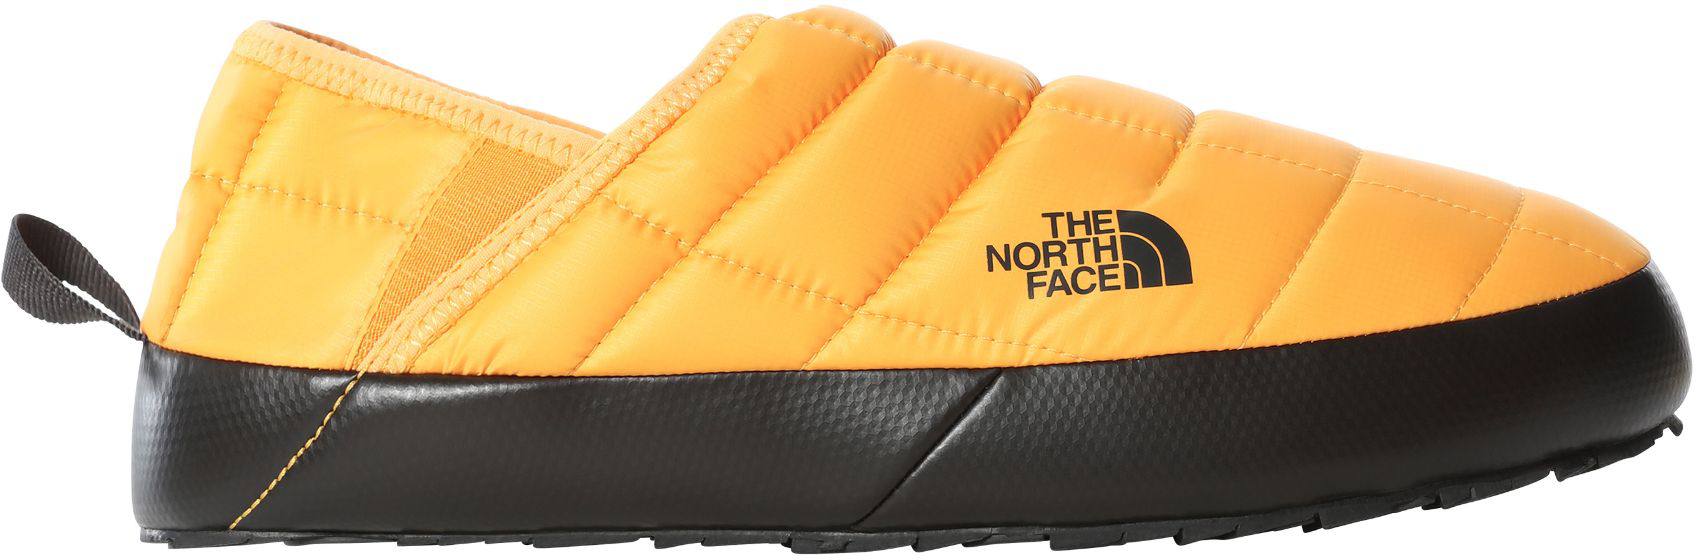 The North Face Men’s Thermoball Traction Mule V